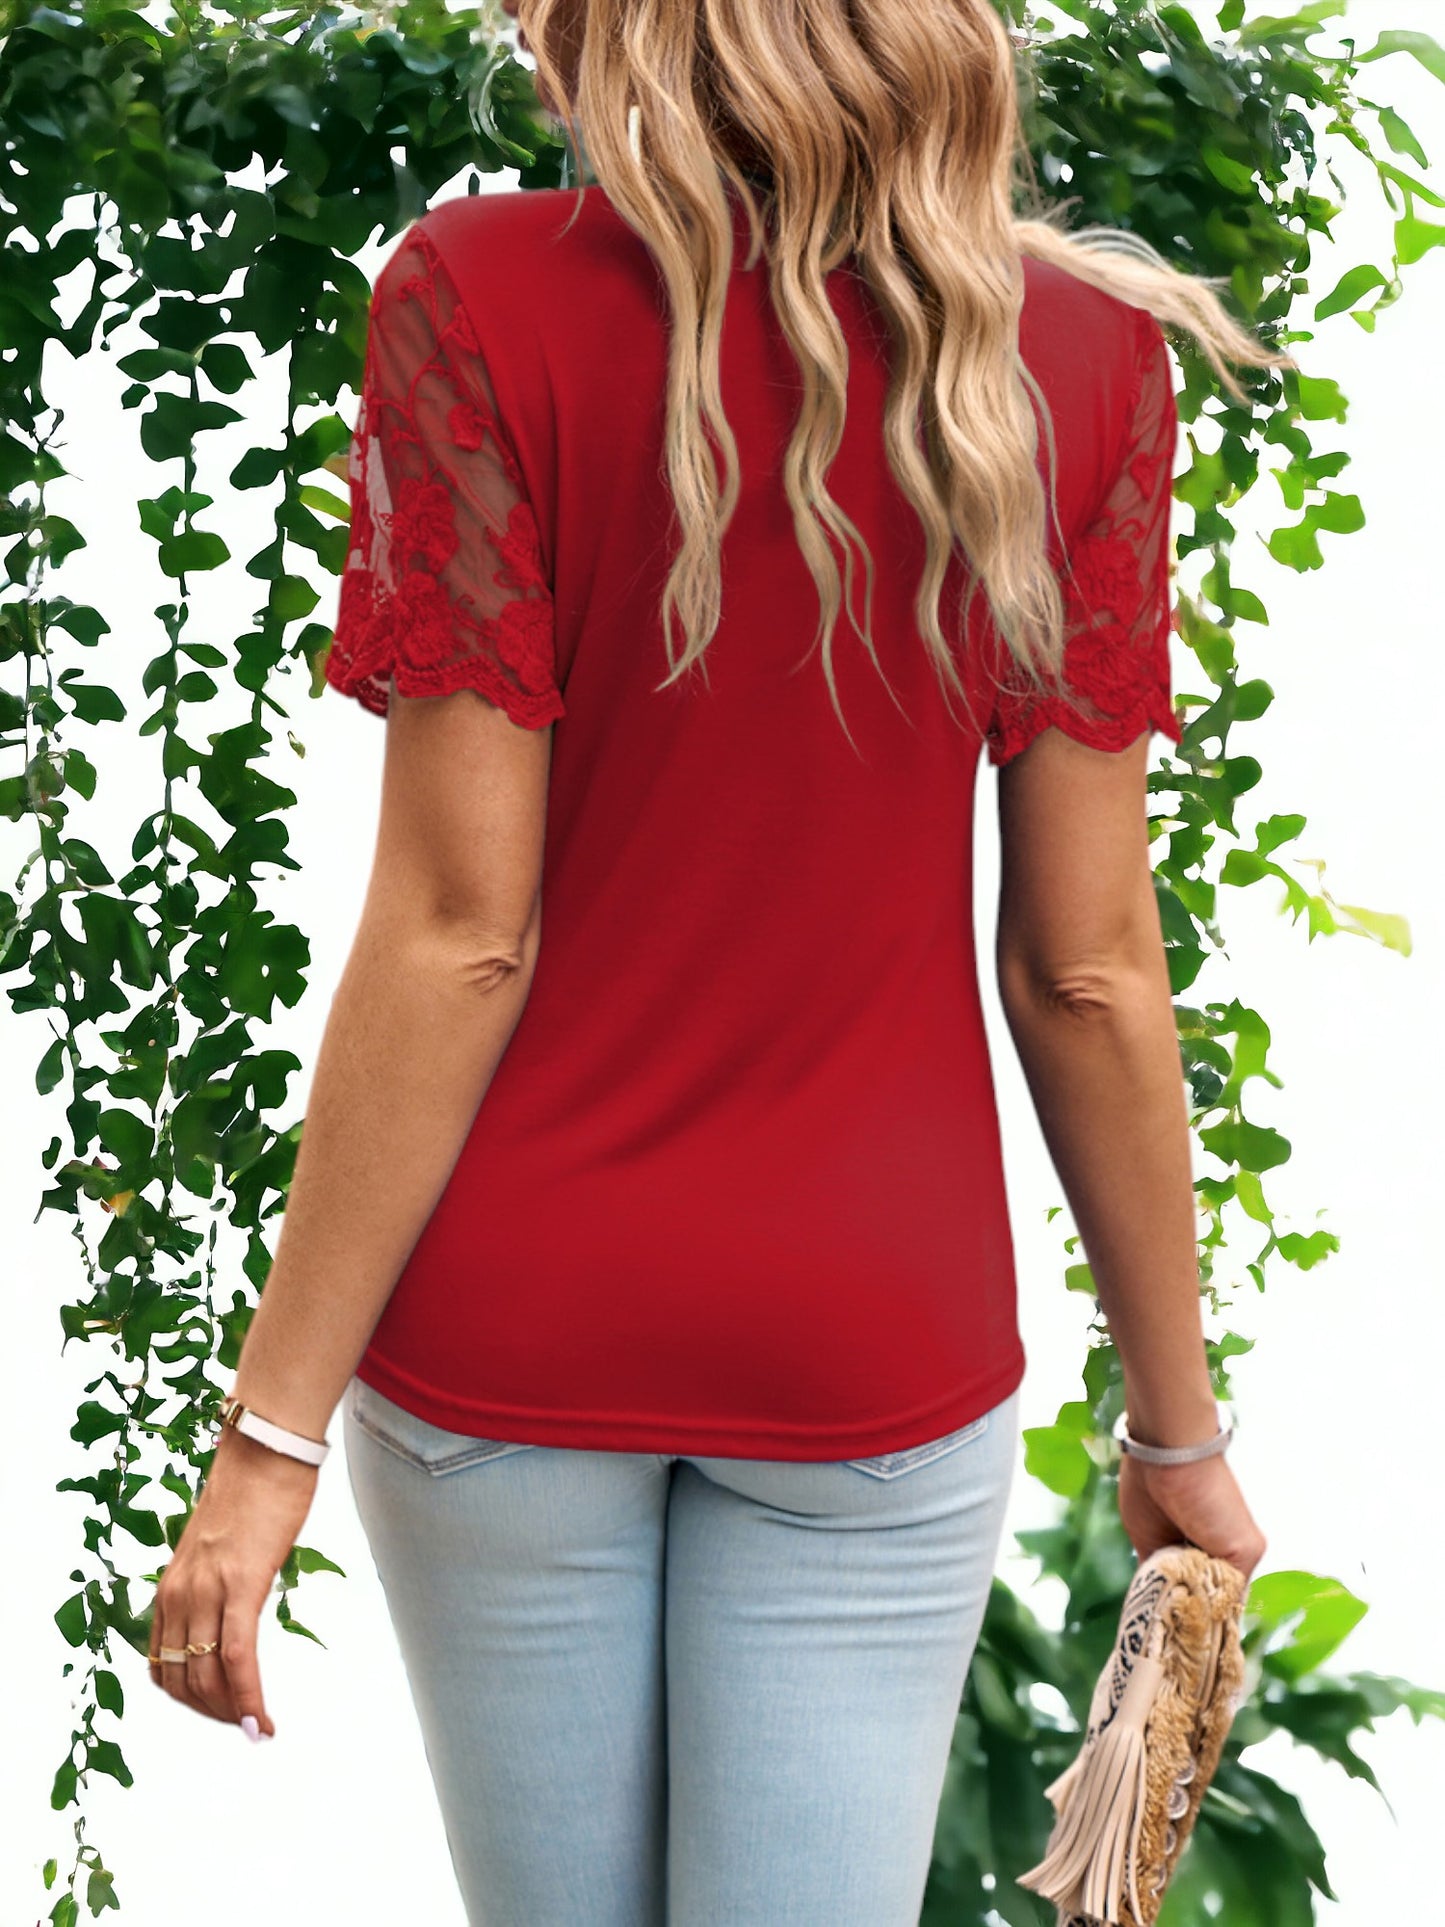 Lace Detailed Short Sleeved Crew Neck T-Shirt